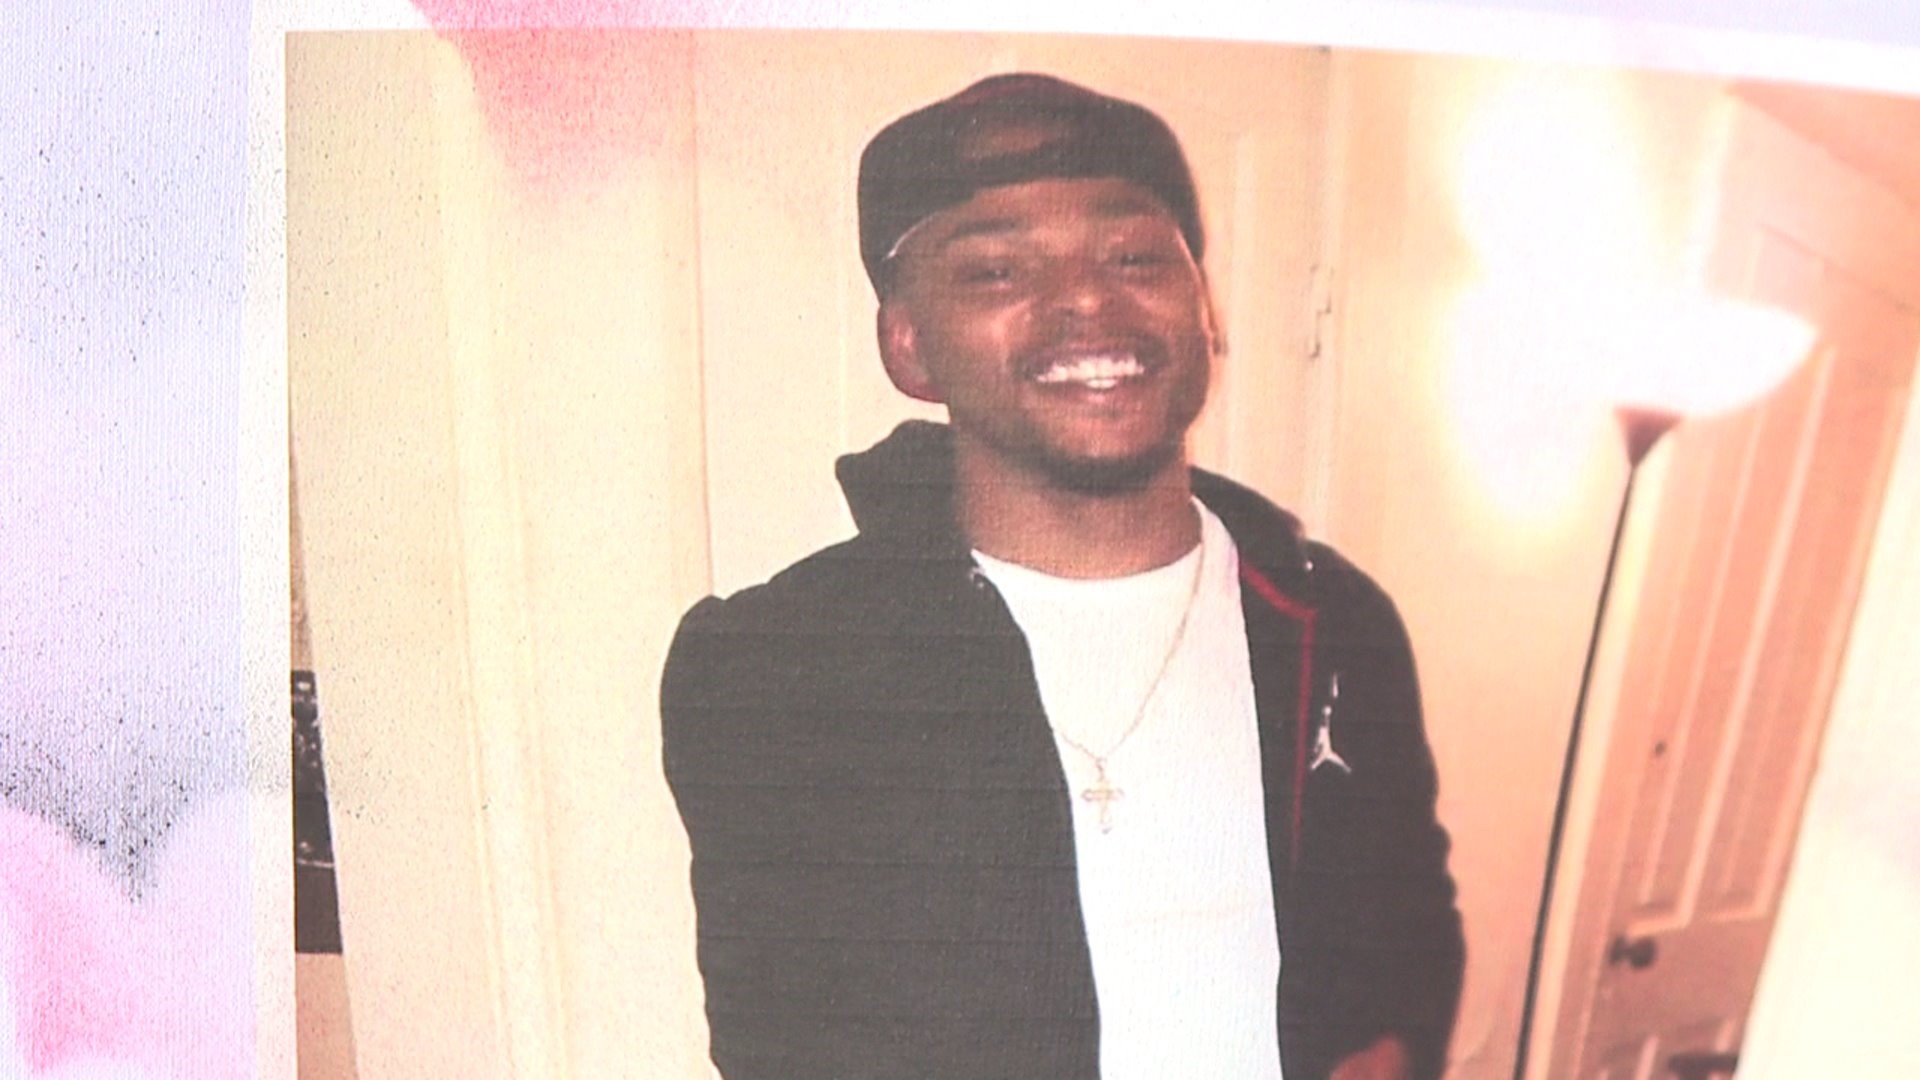 Family and friends remember Burlington man killed in an officer-involved shooting